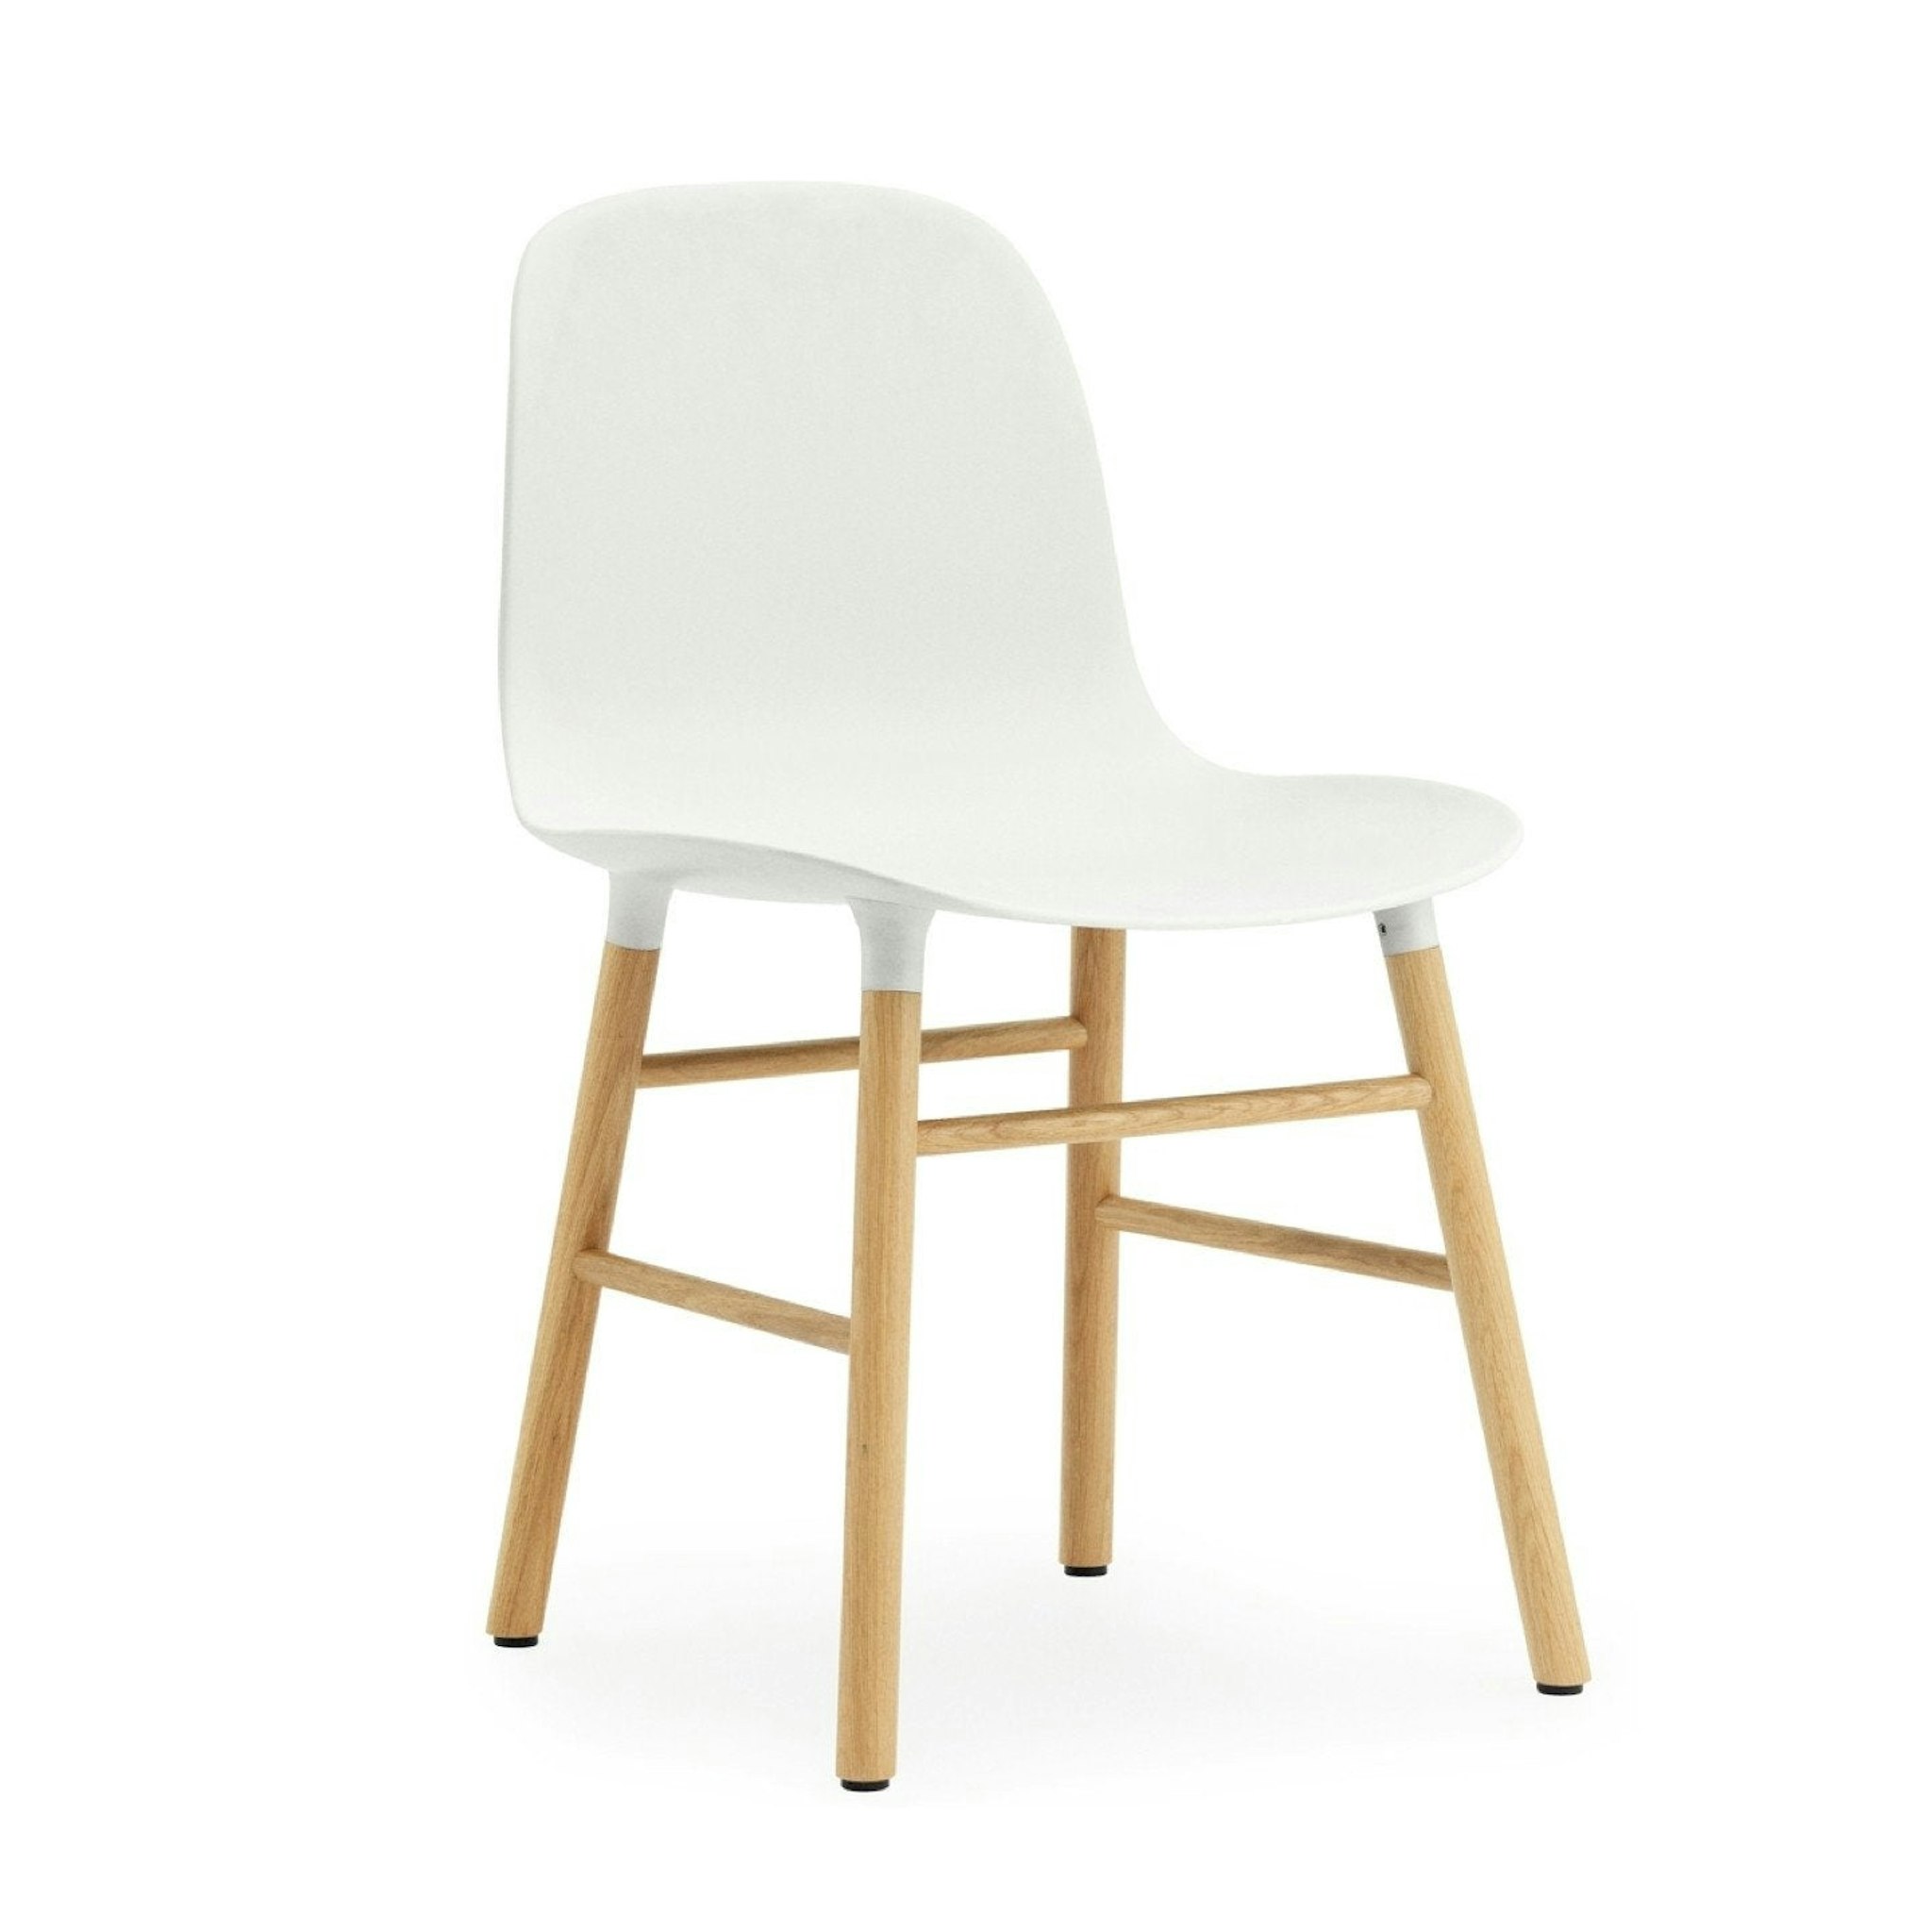 Form Chair with Wooden Base by Normann Copenhagen - Clearance